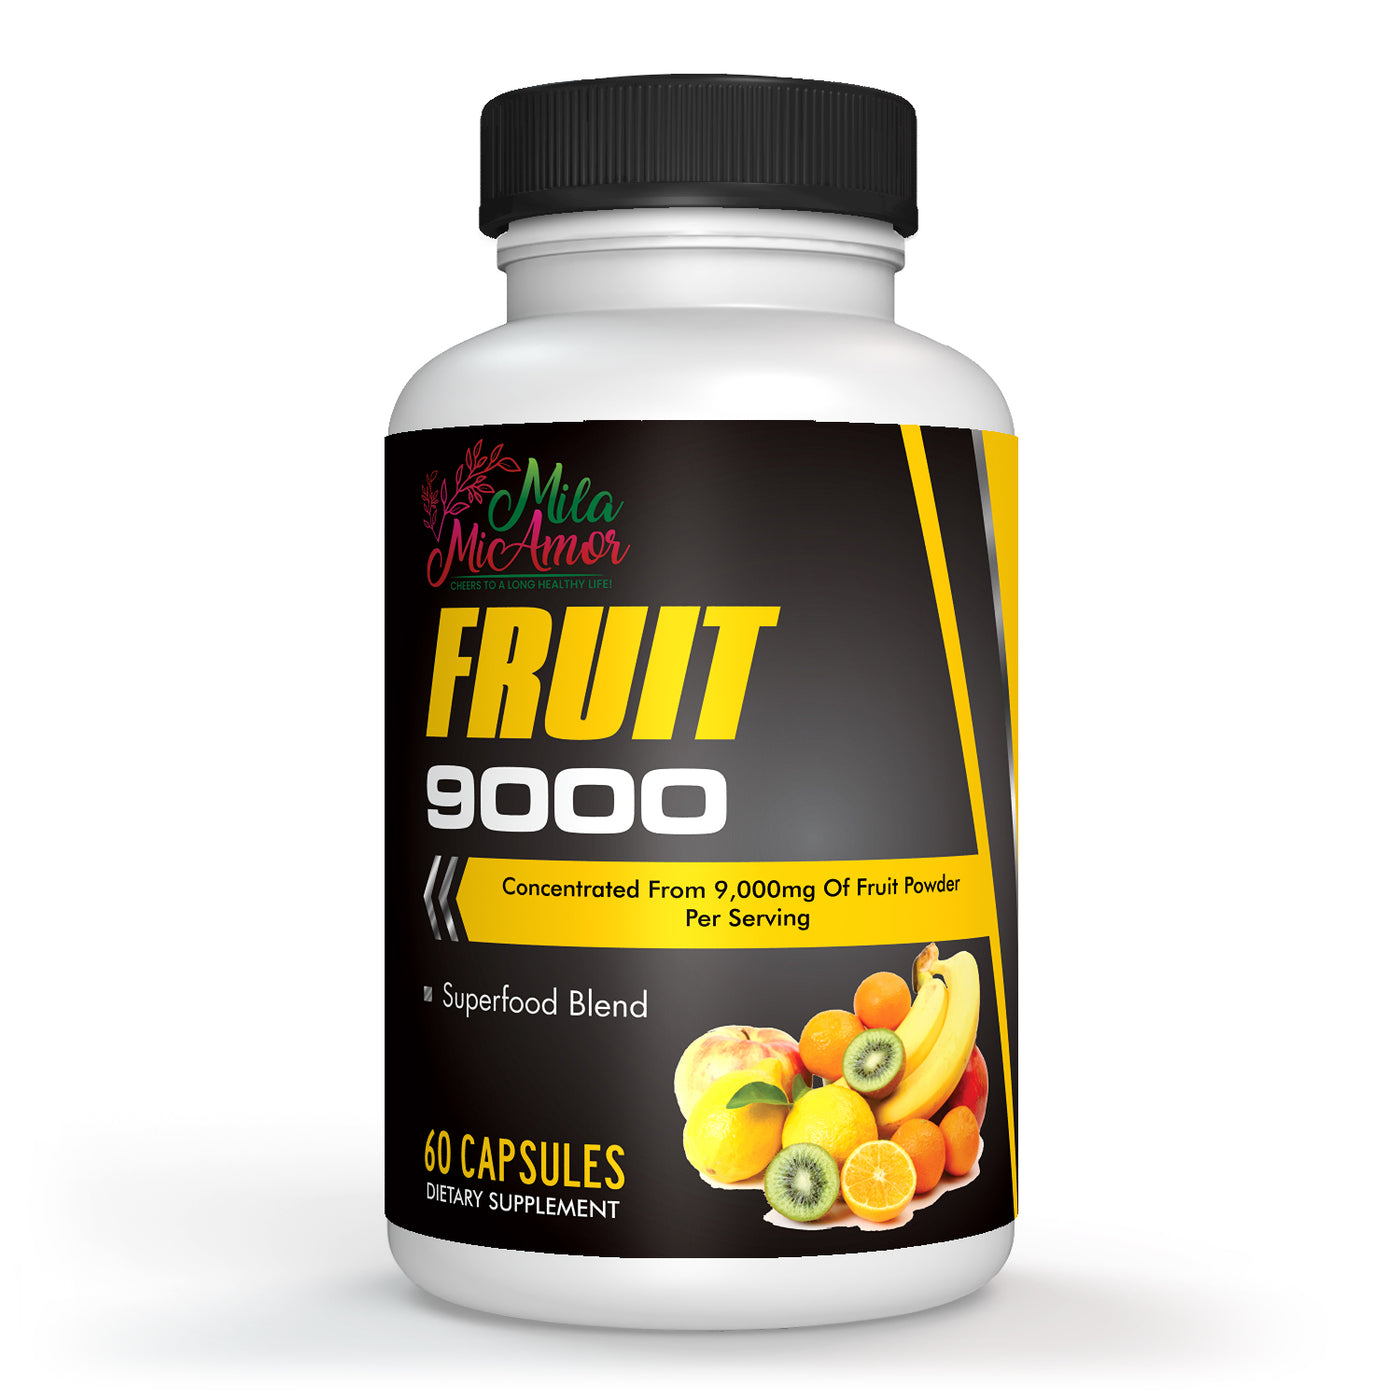 Fruit 9000 | Natural Energy Boost, Better Skin, Immune Power | 9000 mg Concentrated Fruit Power in Every Serving | Made in USA | 60 Capsules